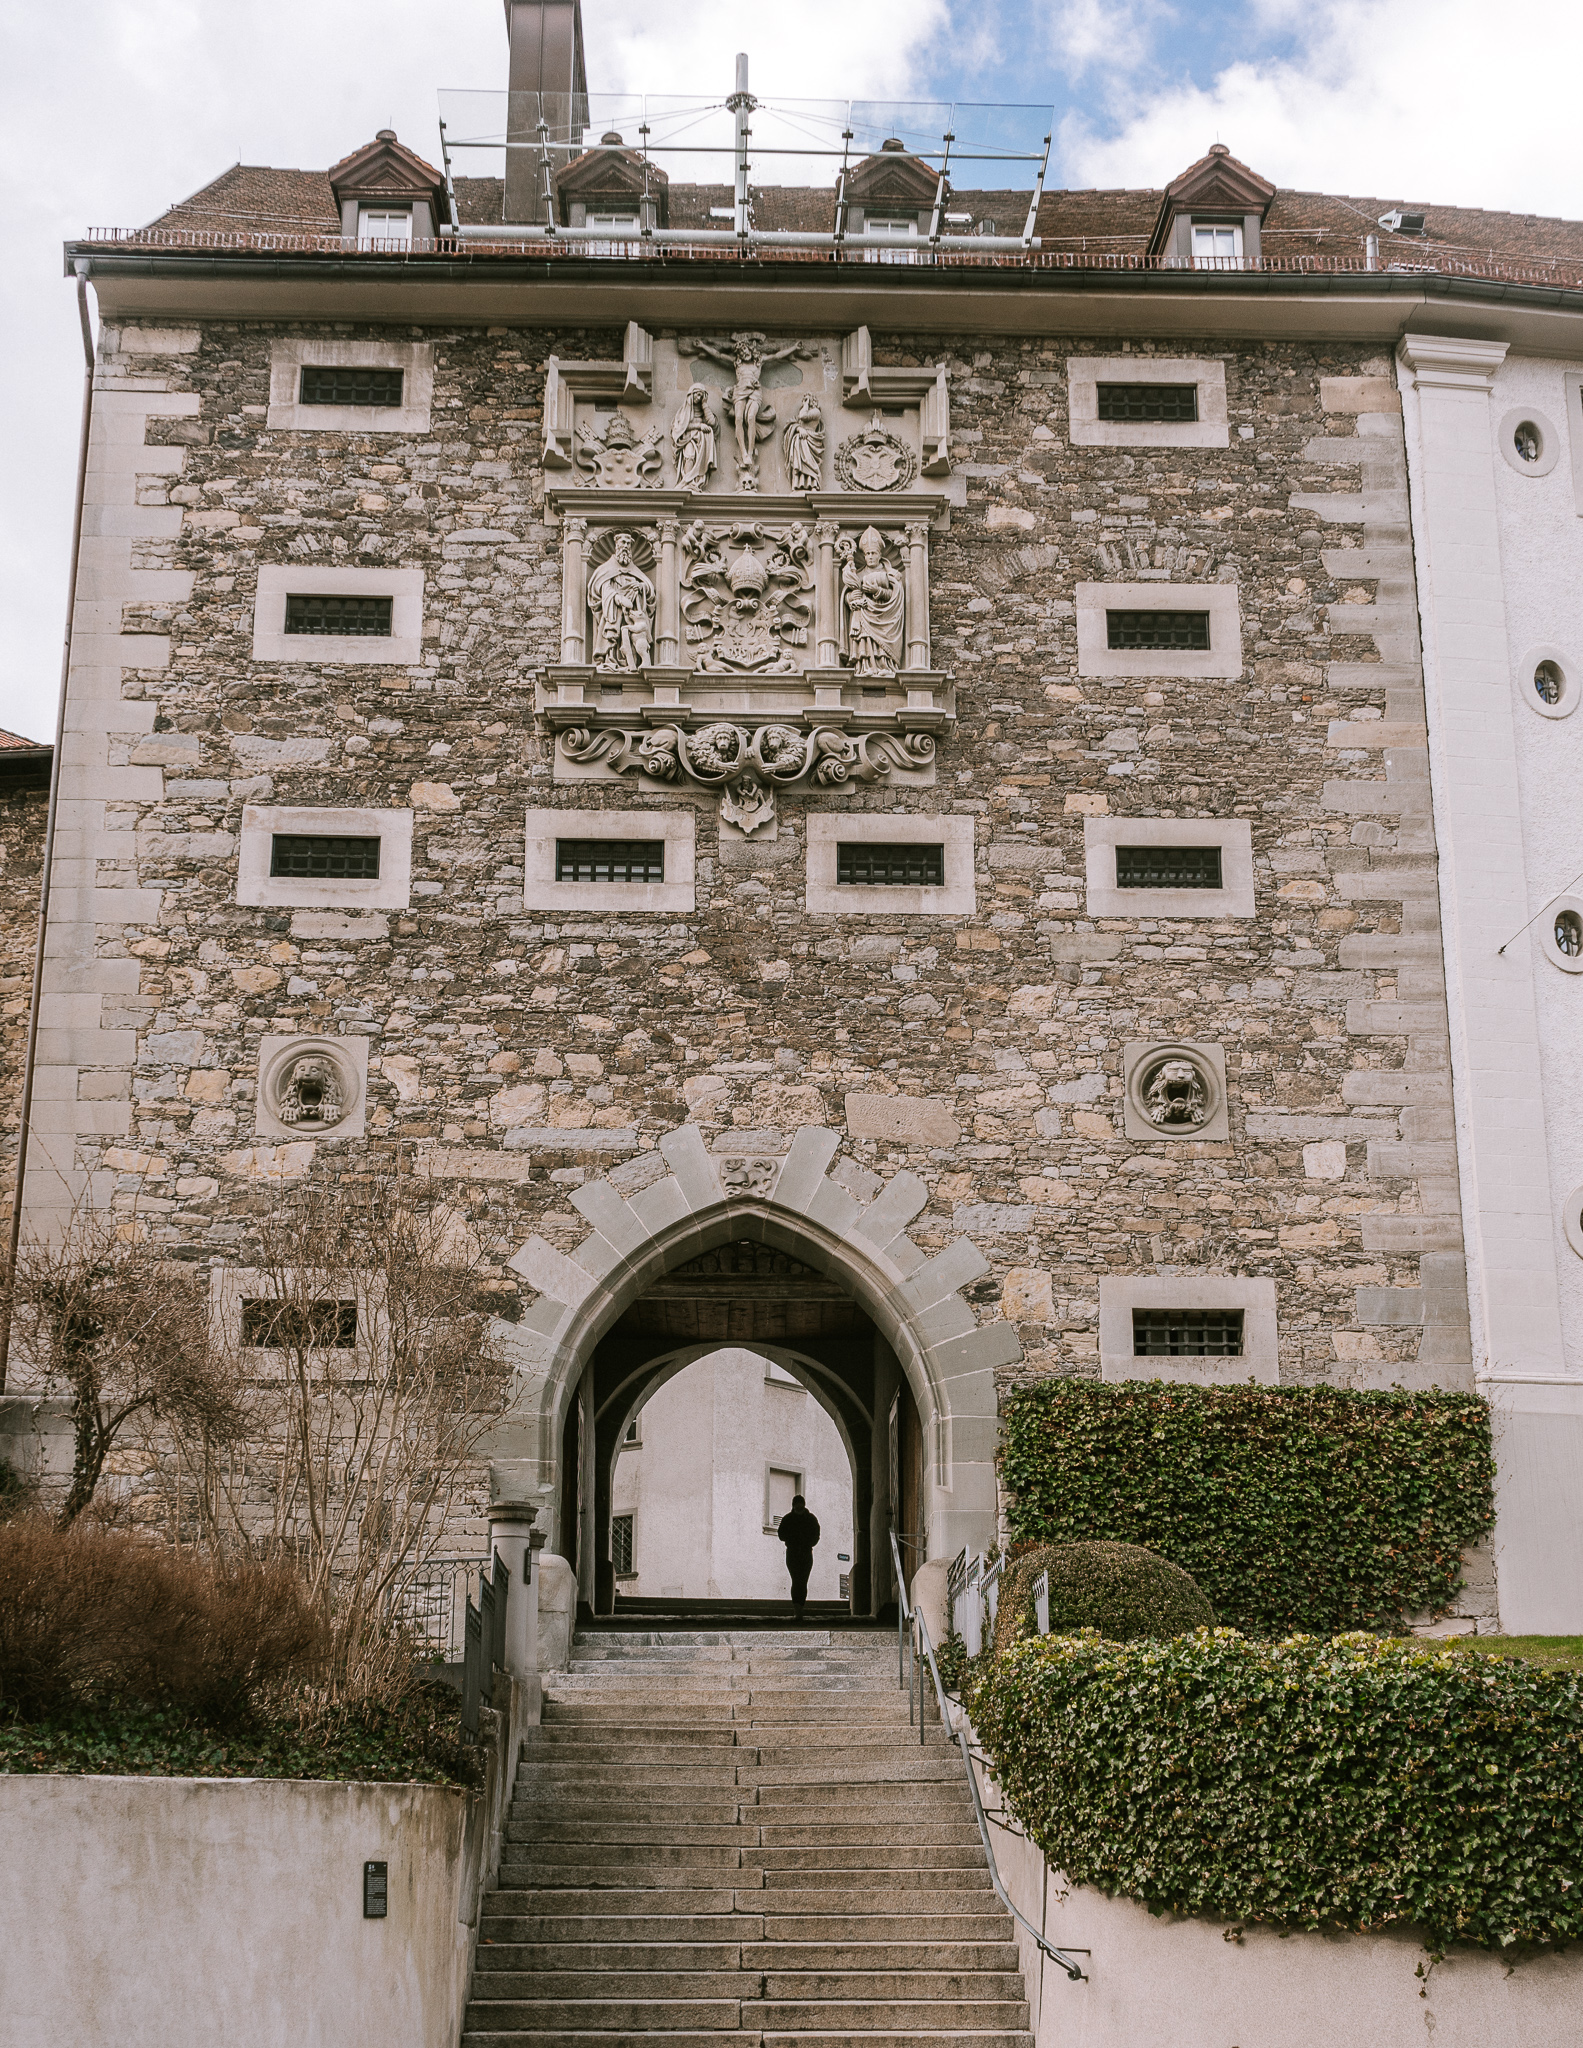 The Karlstor Gate, or the Gate of St. Charles in St. Gallen; a large medieval stone gate with stairs leading through it.